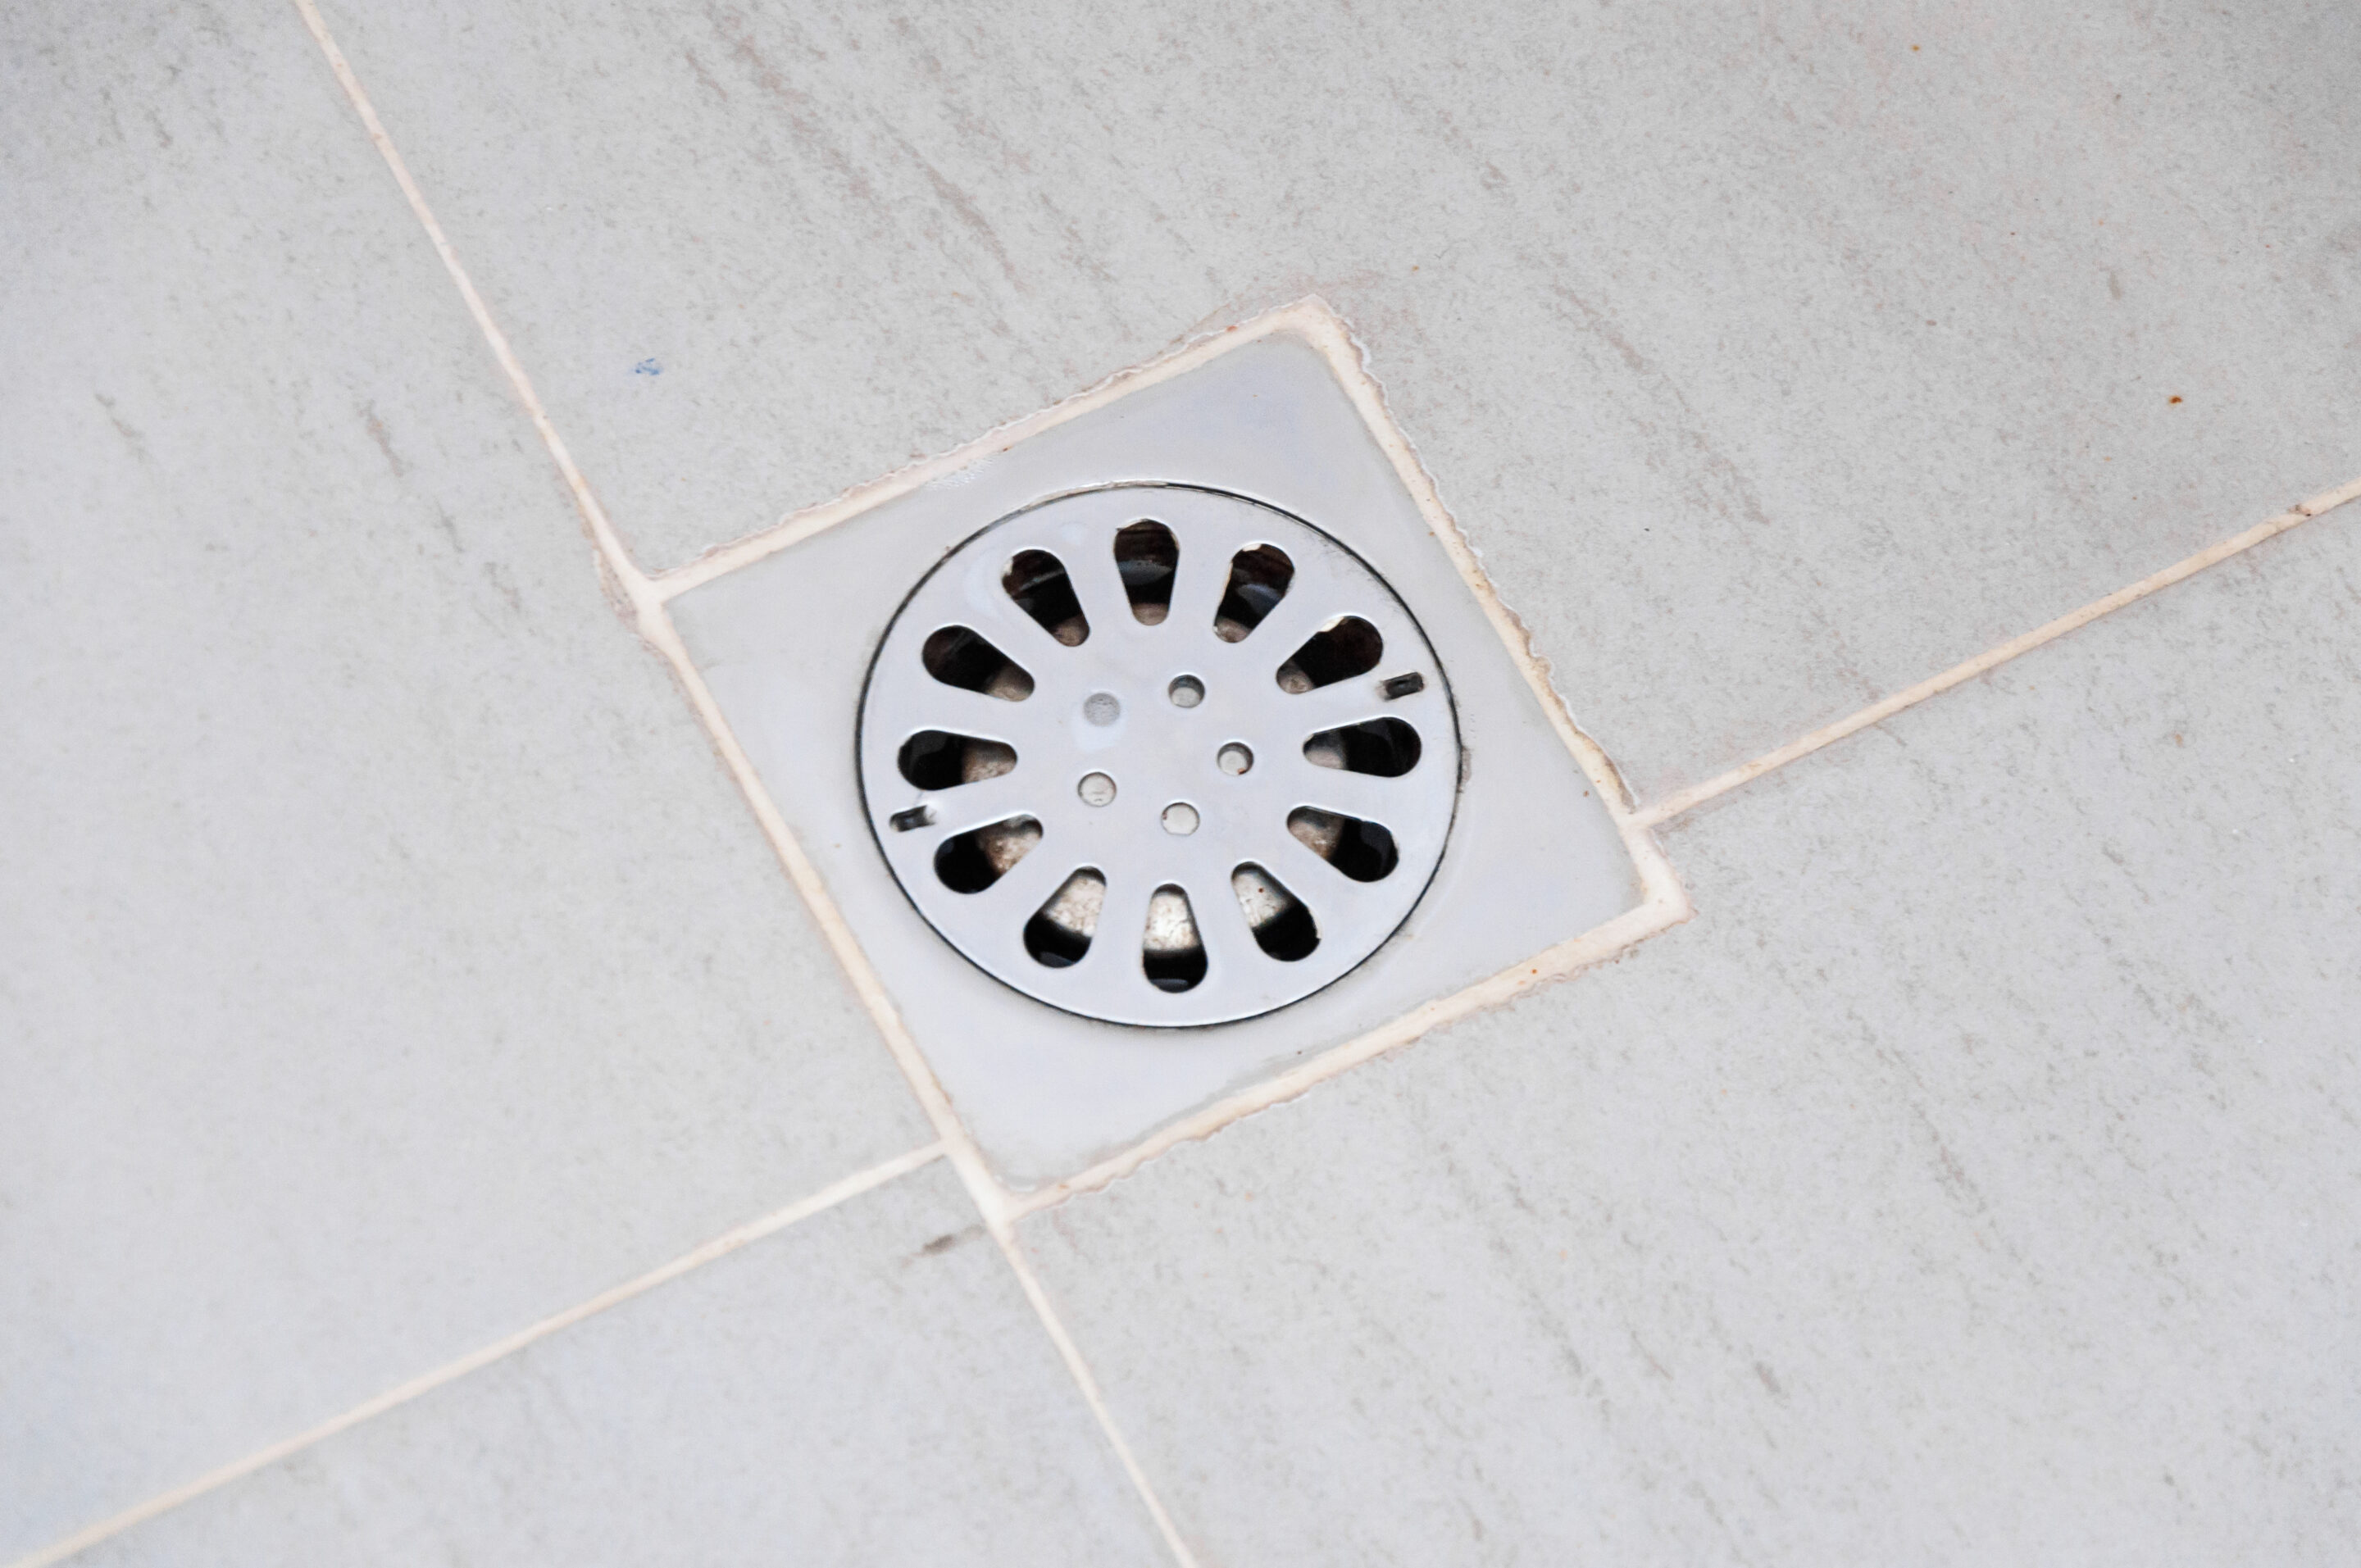 A floor drain, like one that Plumbing Solutions might unclog